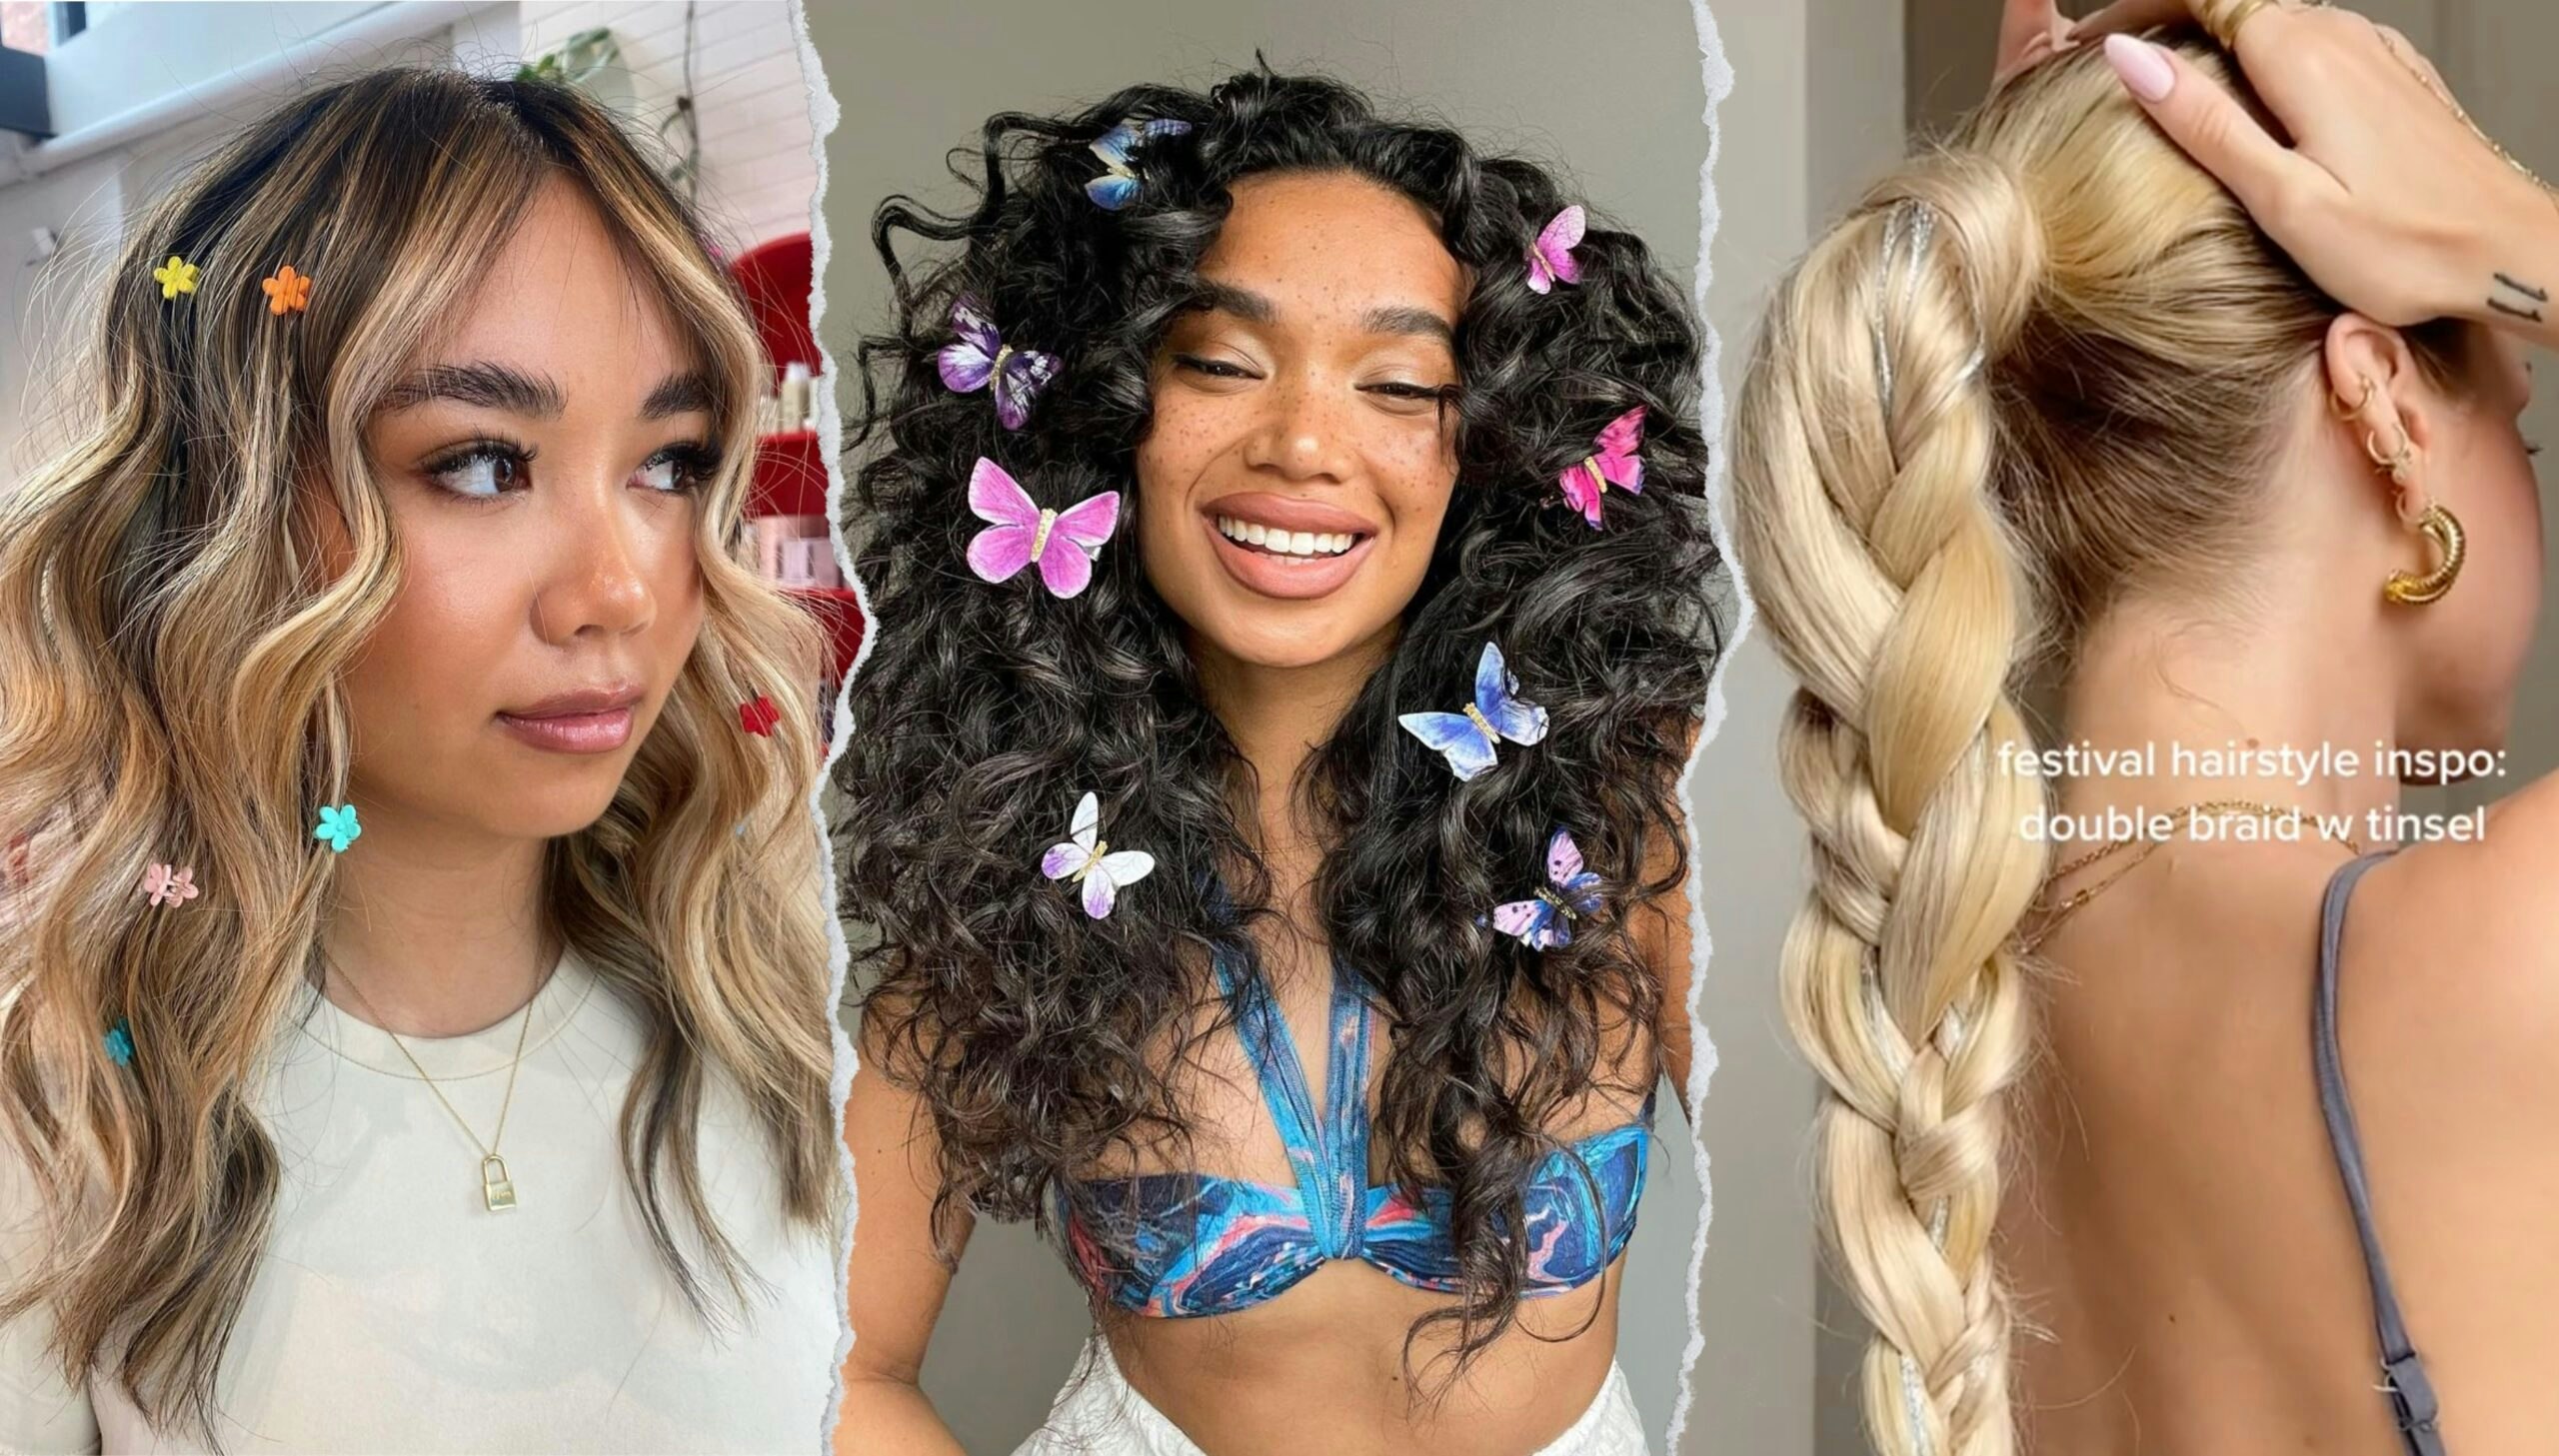 The 46 Best Festival Hairstyles To Slay This Music Festival Season